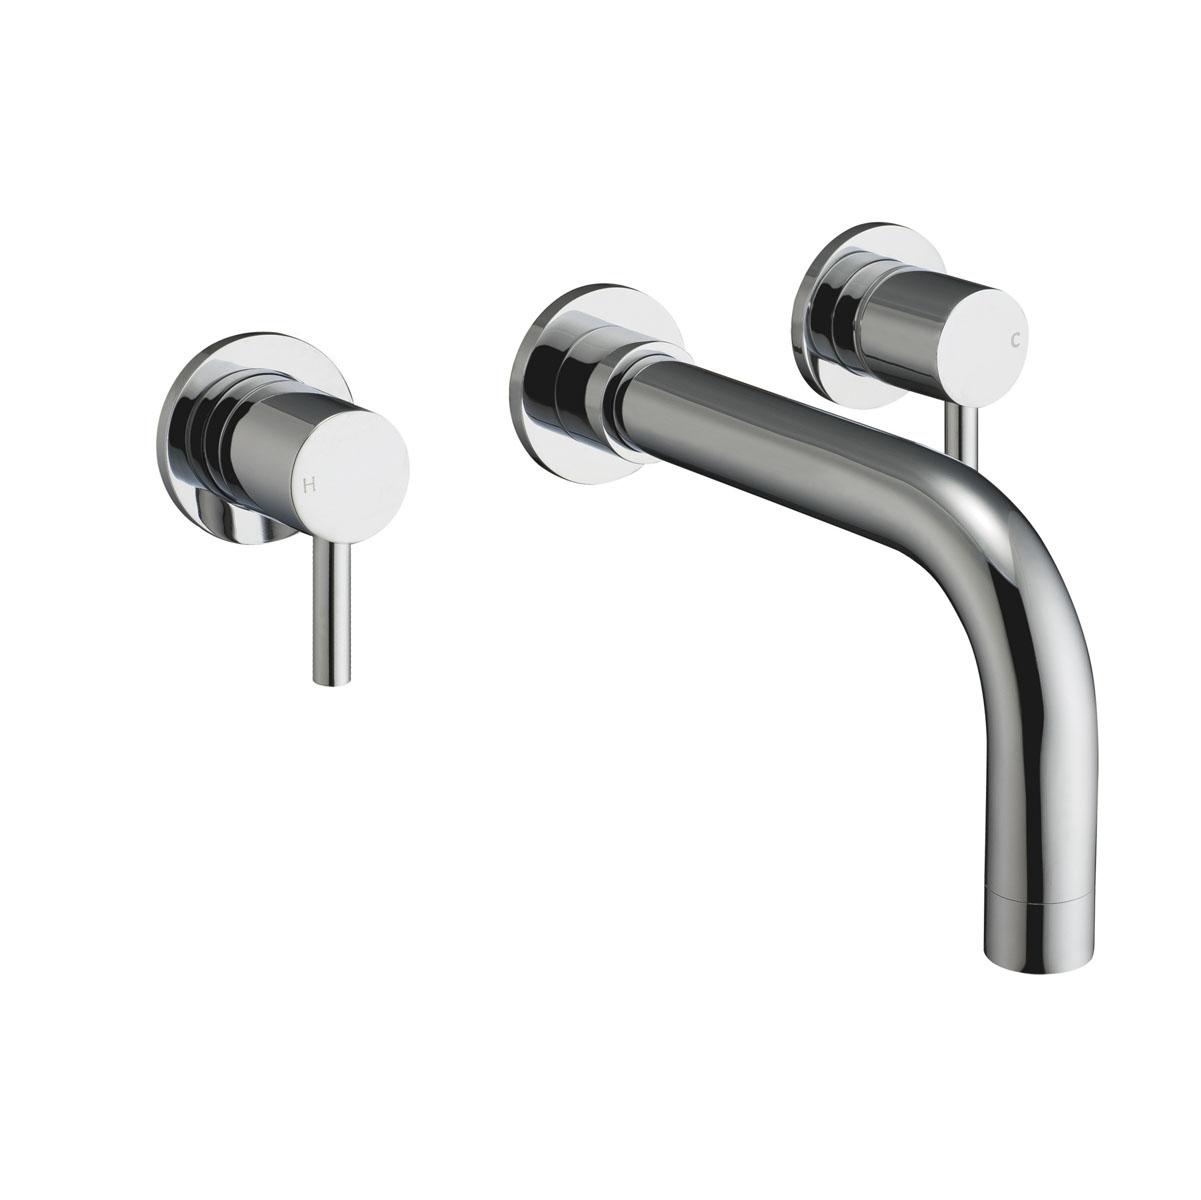 An image of Zico 3-Hole Wall Mounted Basin Mixer Tap - Chrome